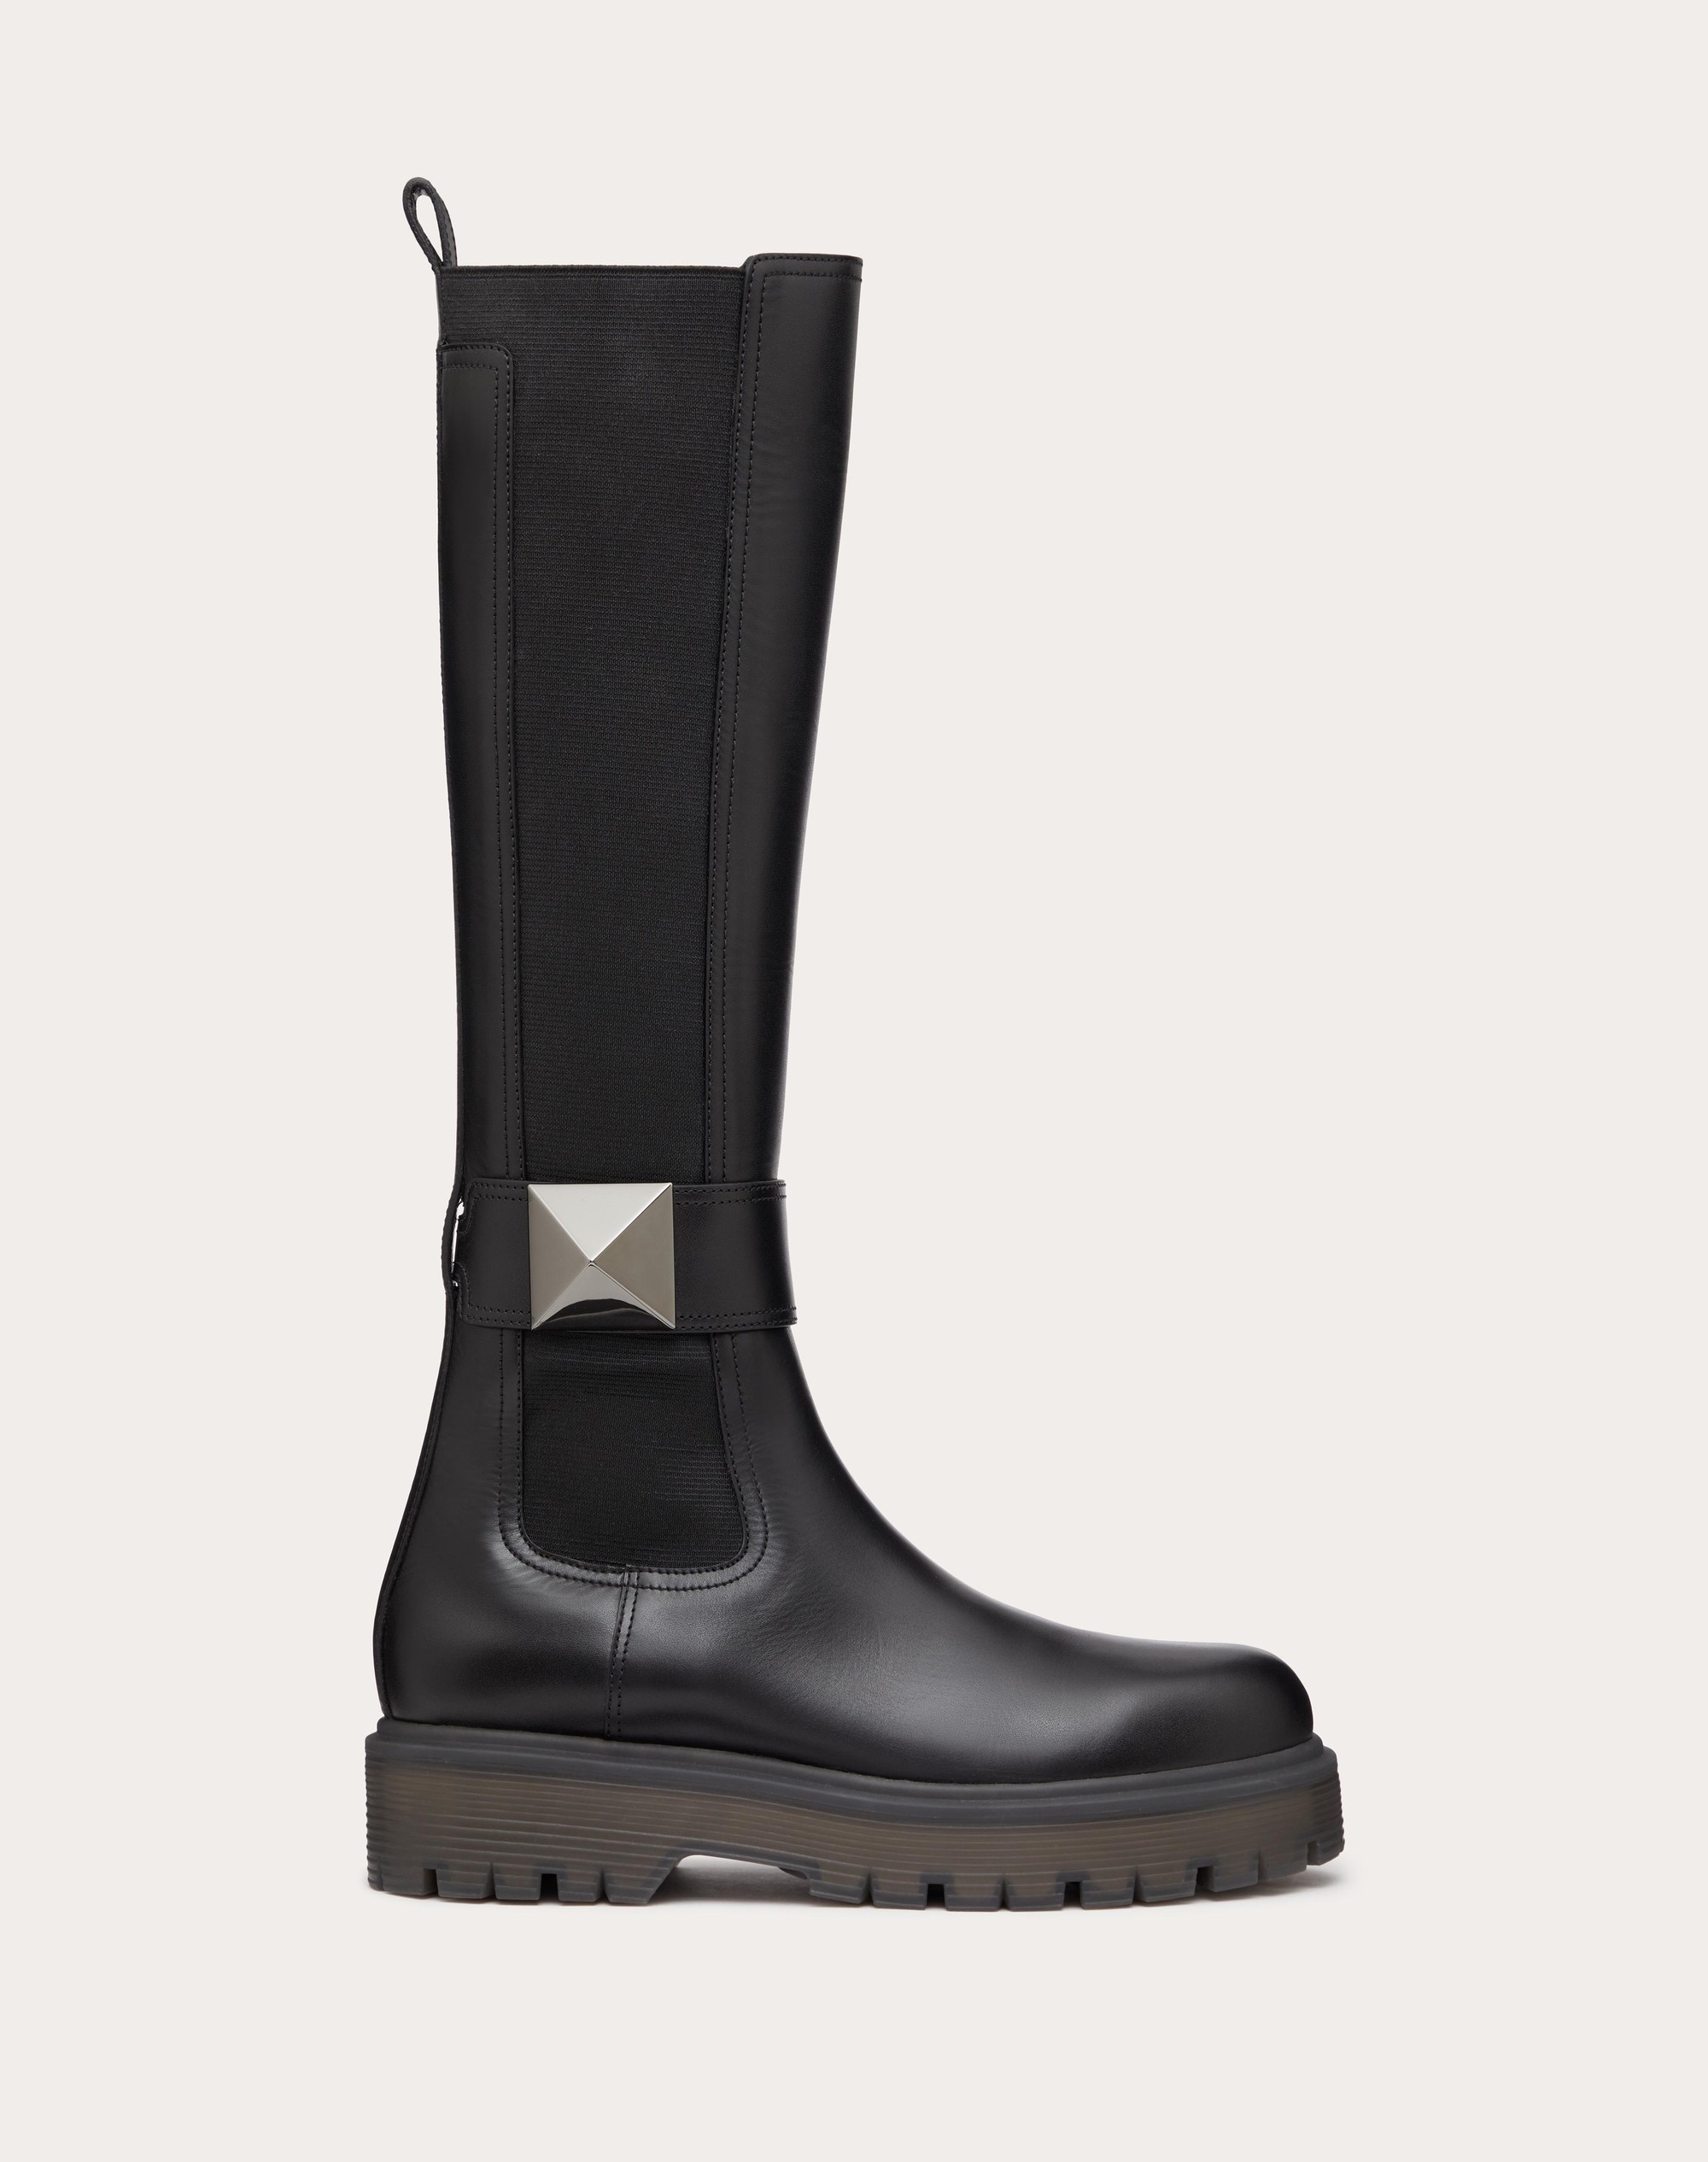 ONE STUD BOOT IN CALFSKIN 45MM - 1